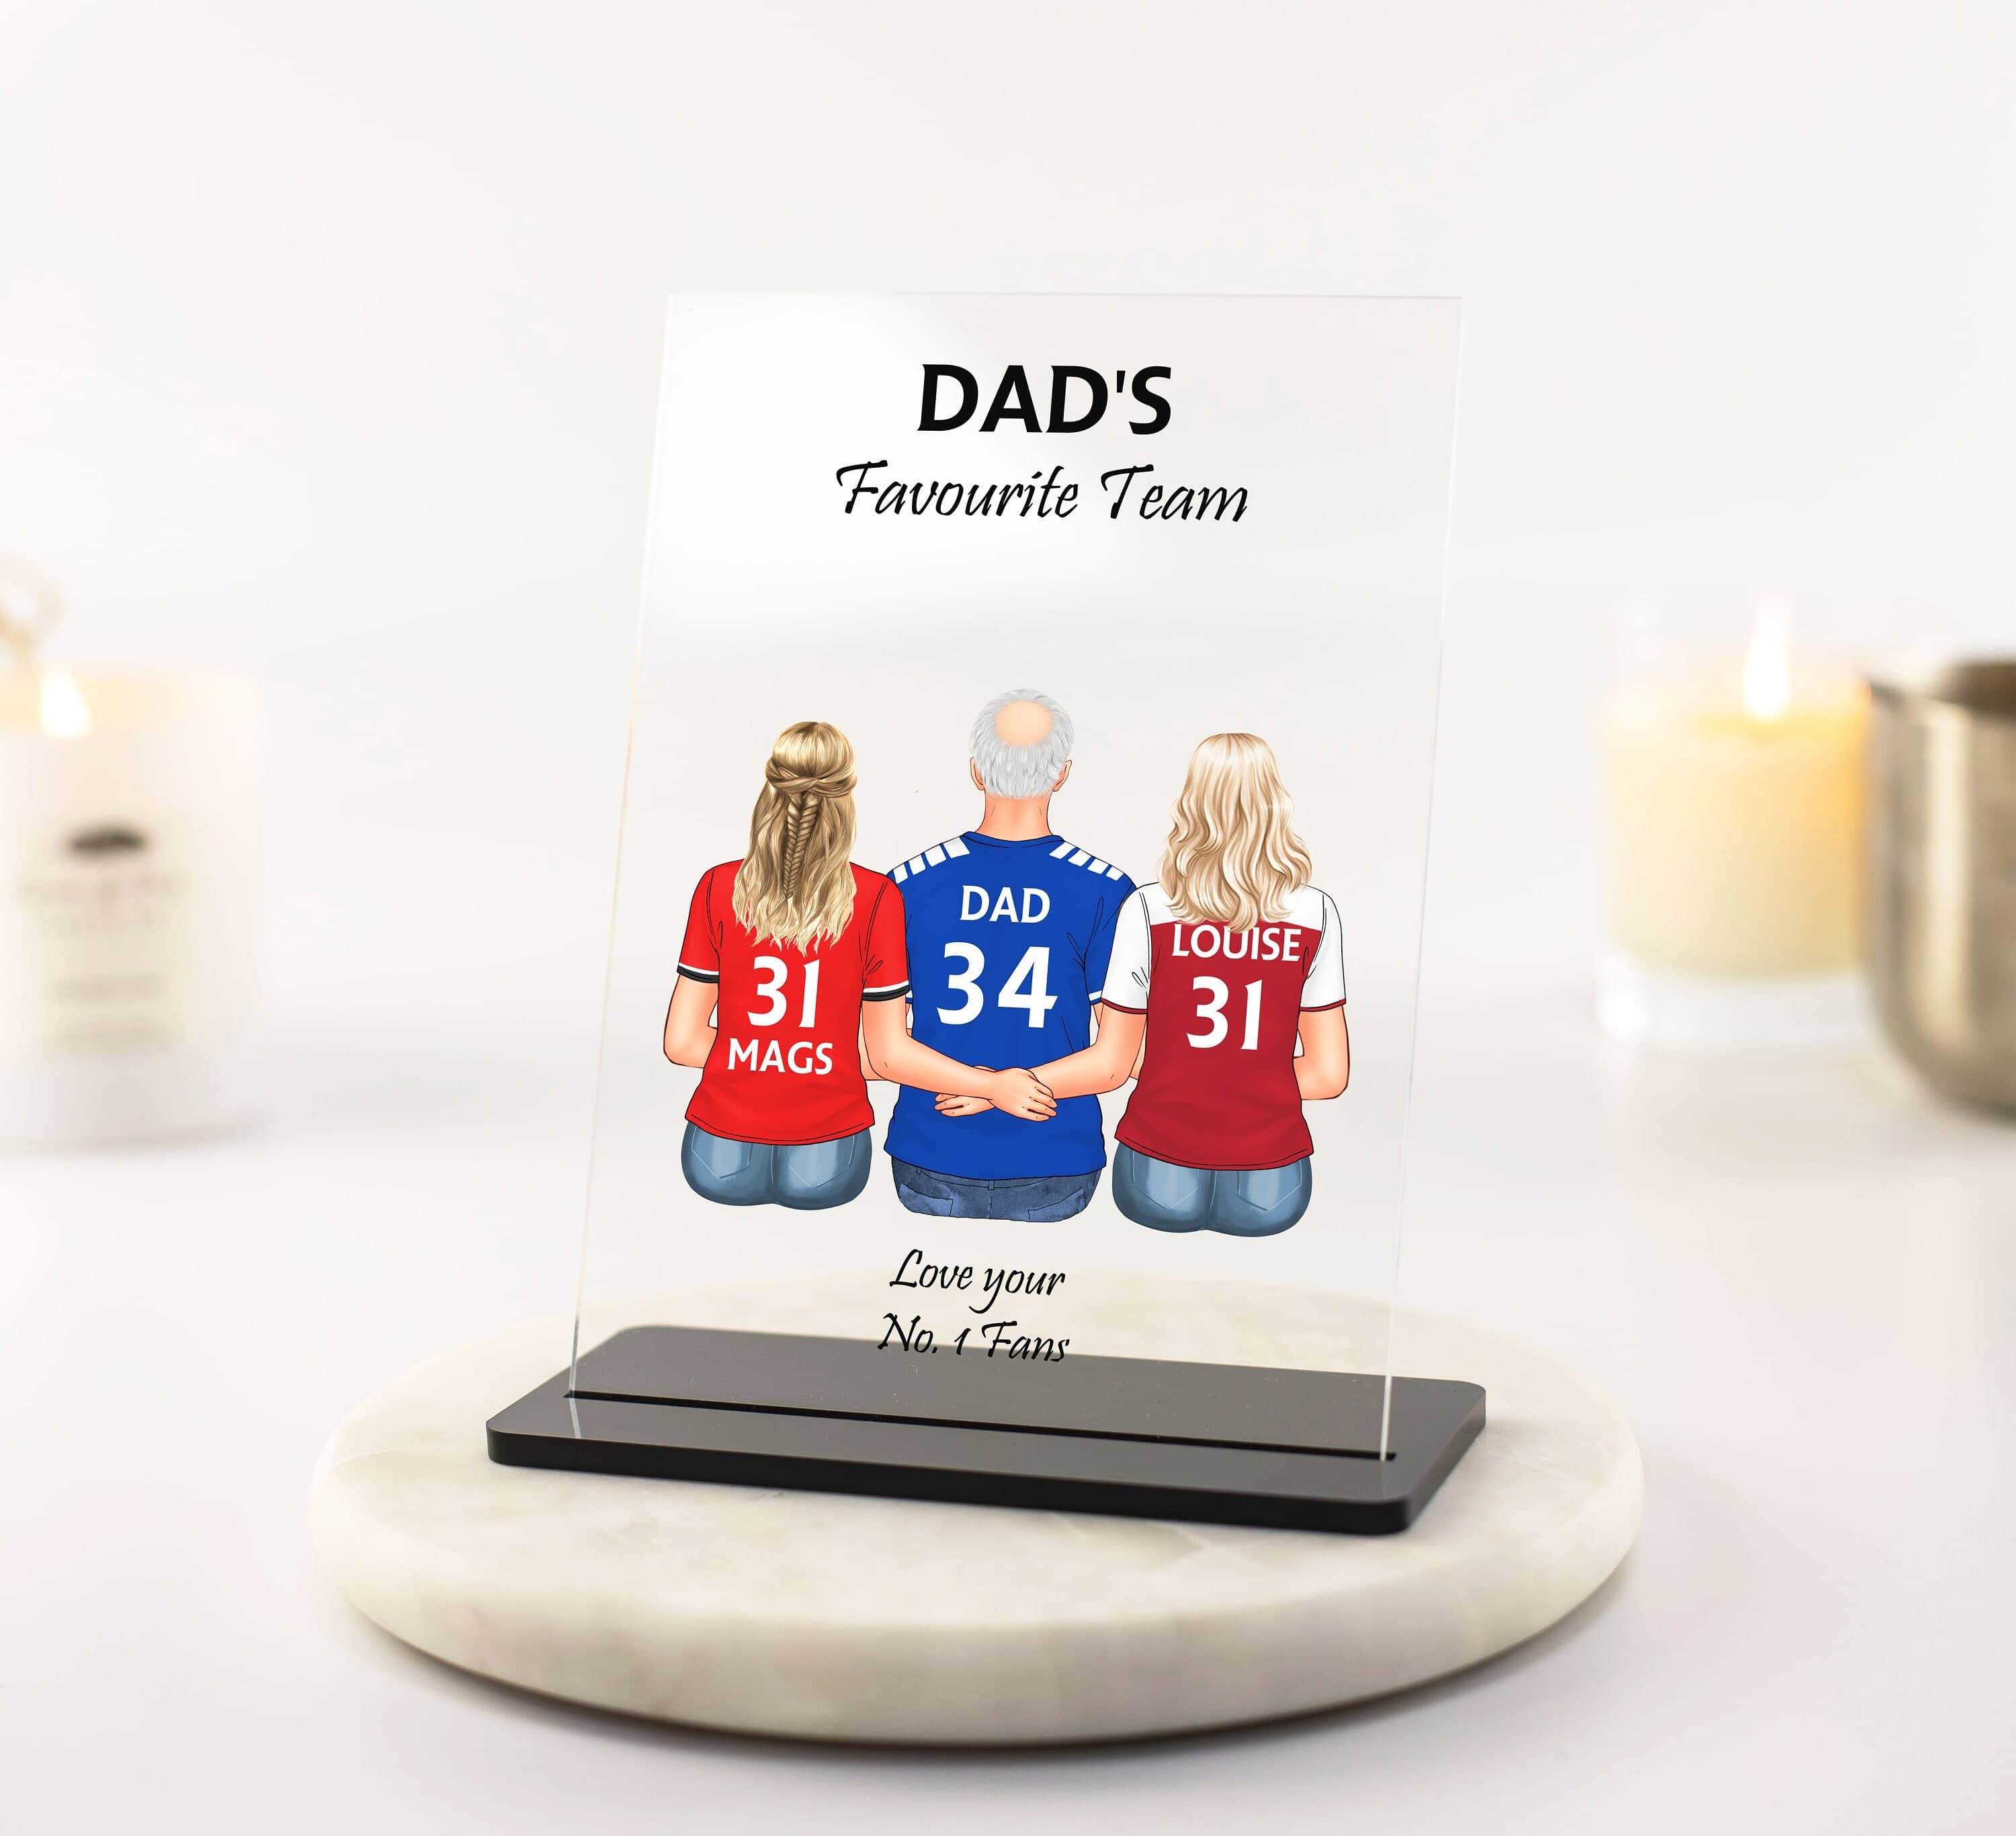 Personalised Father's Day Gift, Gift from Daughter, Custom Dad and Daughters Print, Birthday gifts for Dad, Gifts for Grandad,Acrylic Plaque